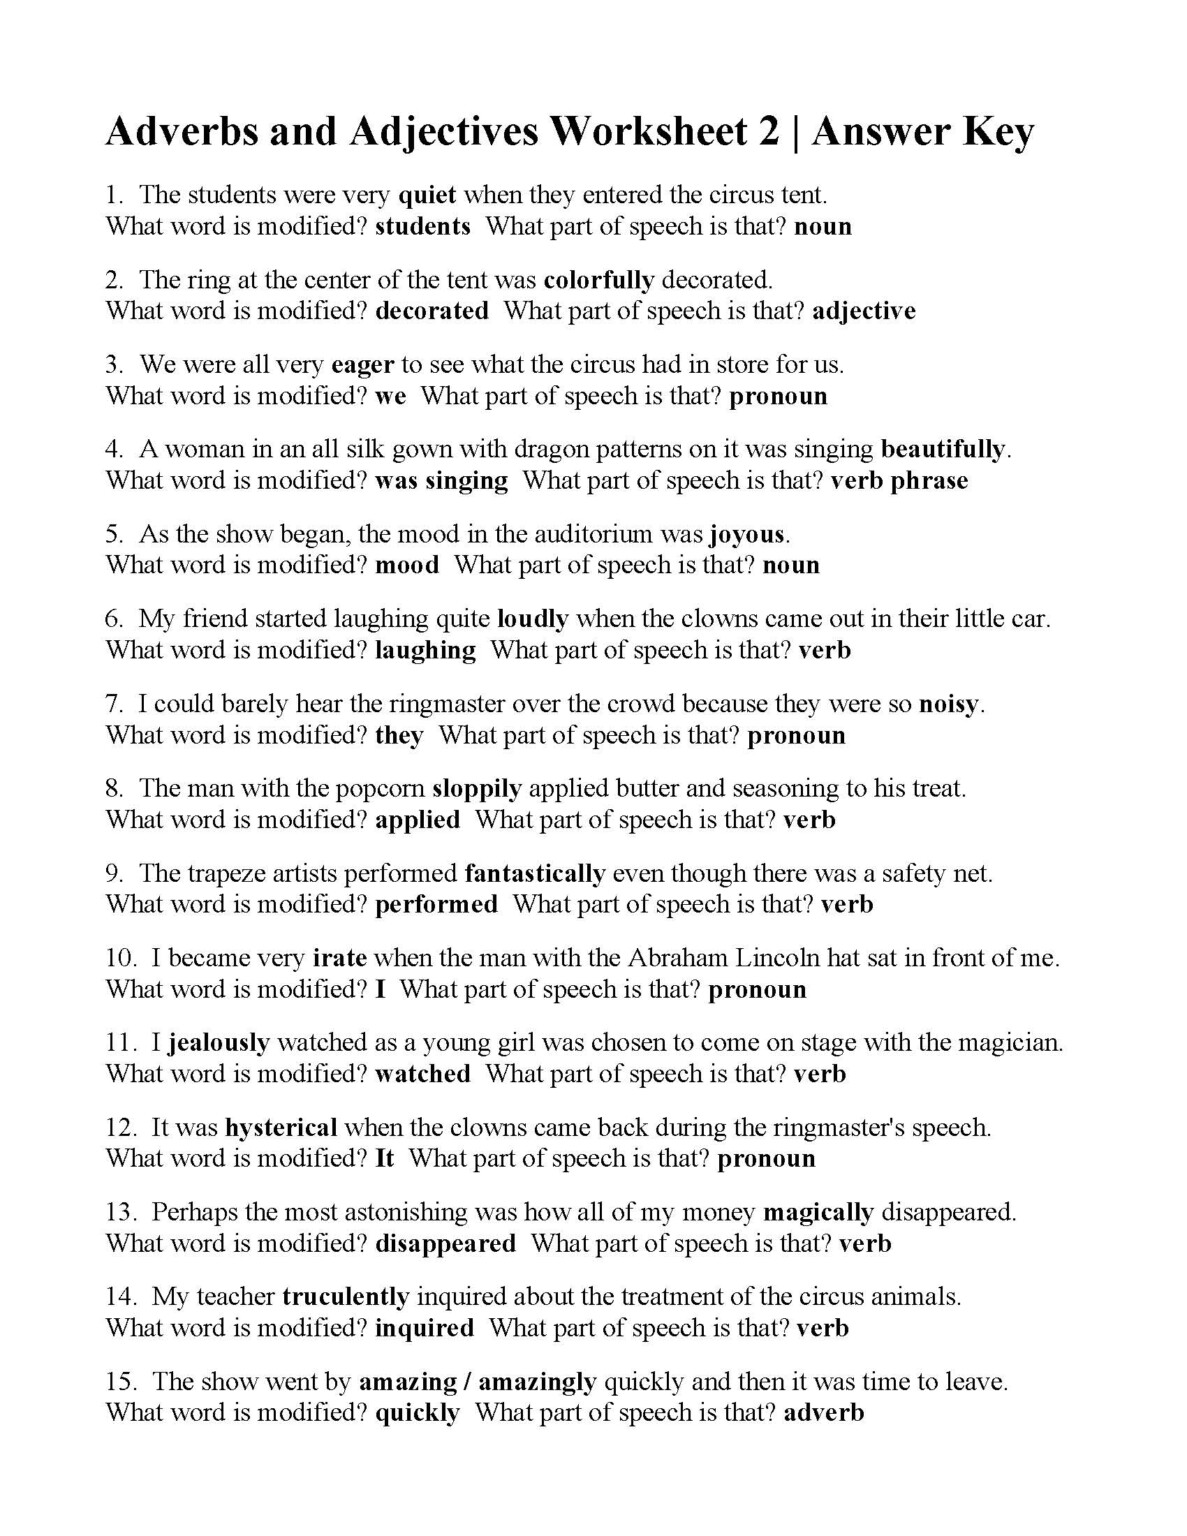 adverb-clauses-quiz-with-answers-adverbworksheets